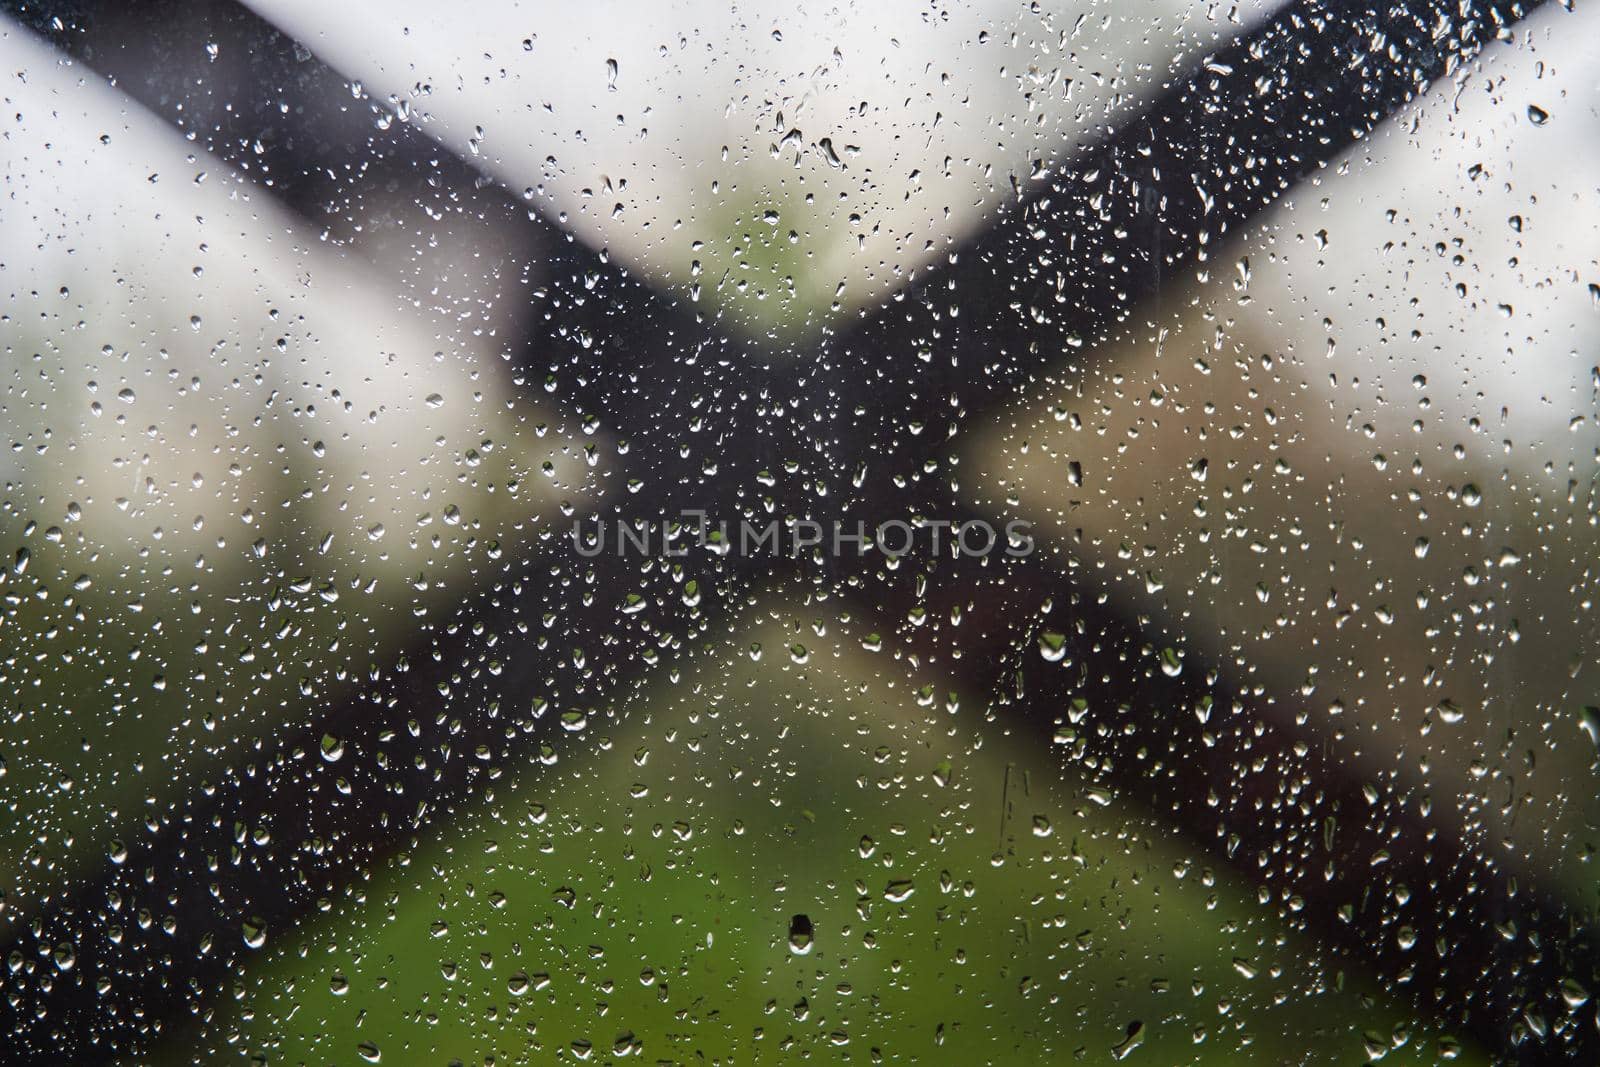 A lot of drops of water on the glass. Window glass with raindrops. Background image